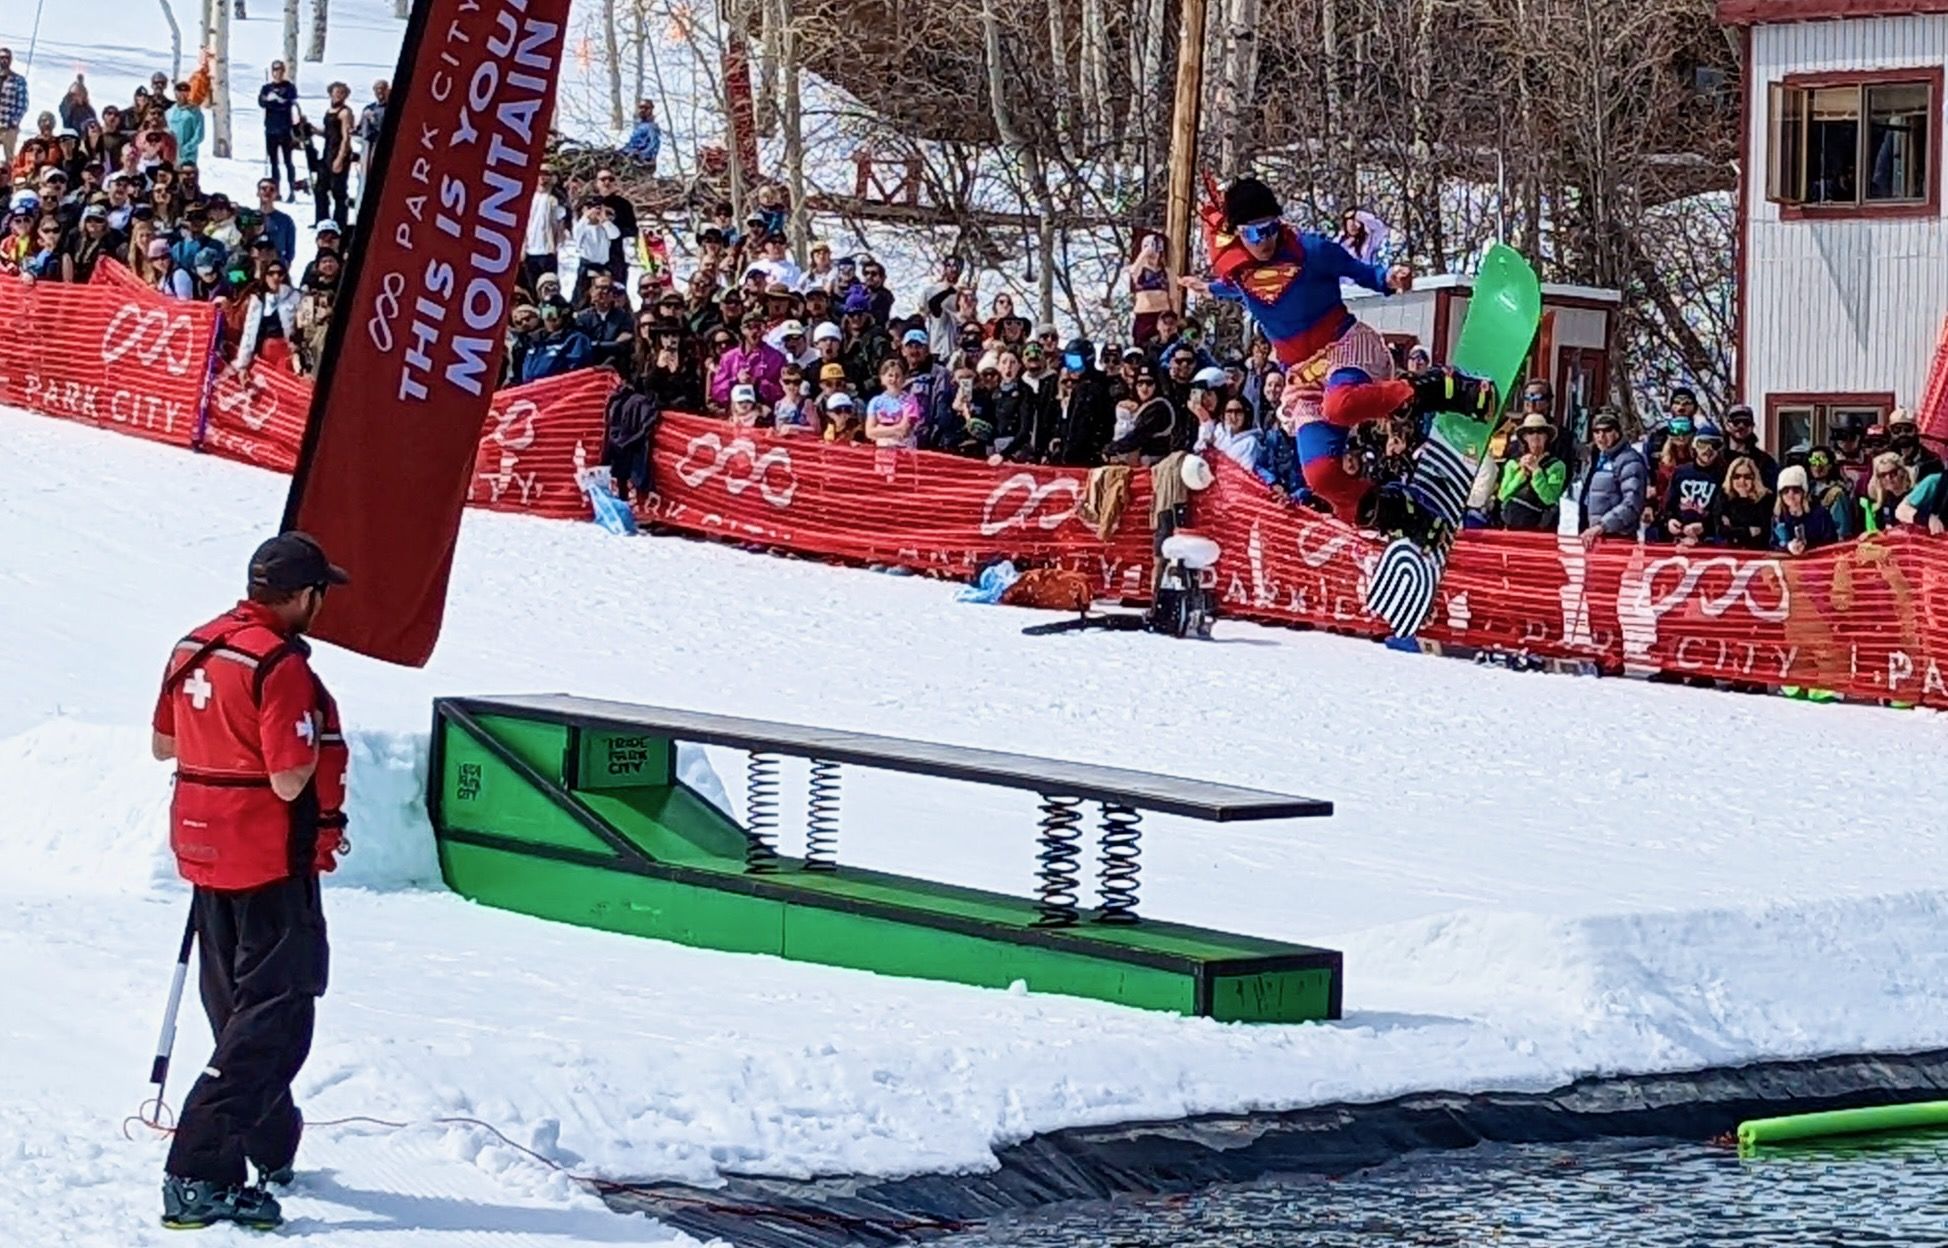 A skier dressed as Superwoman vaults off a ski jump over a pool of water.